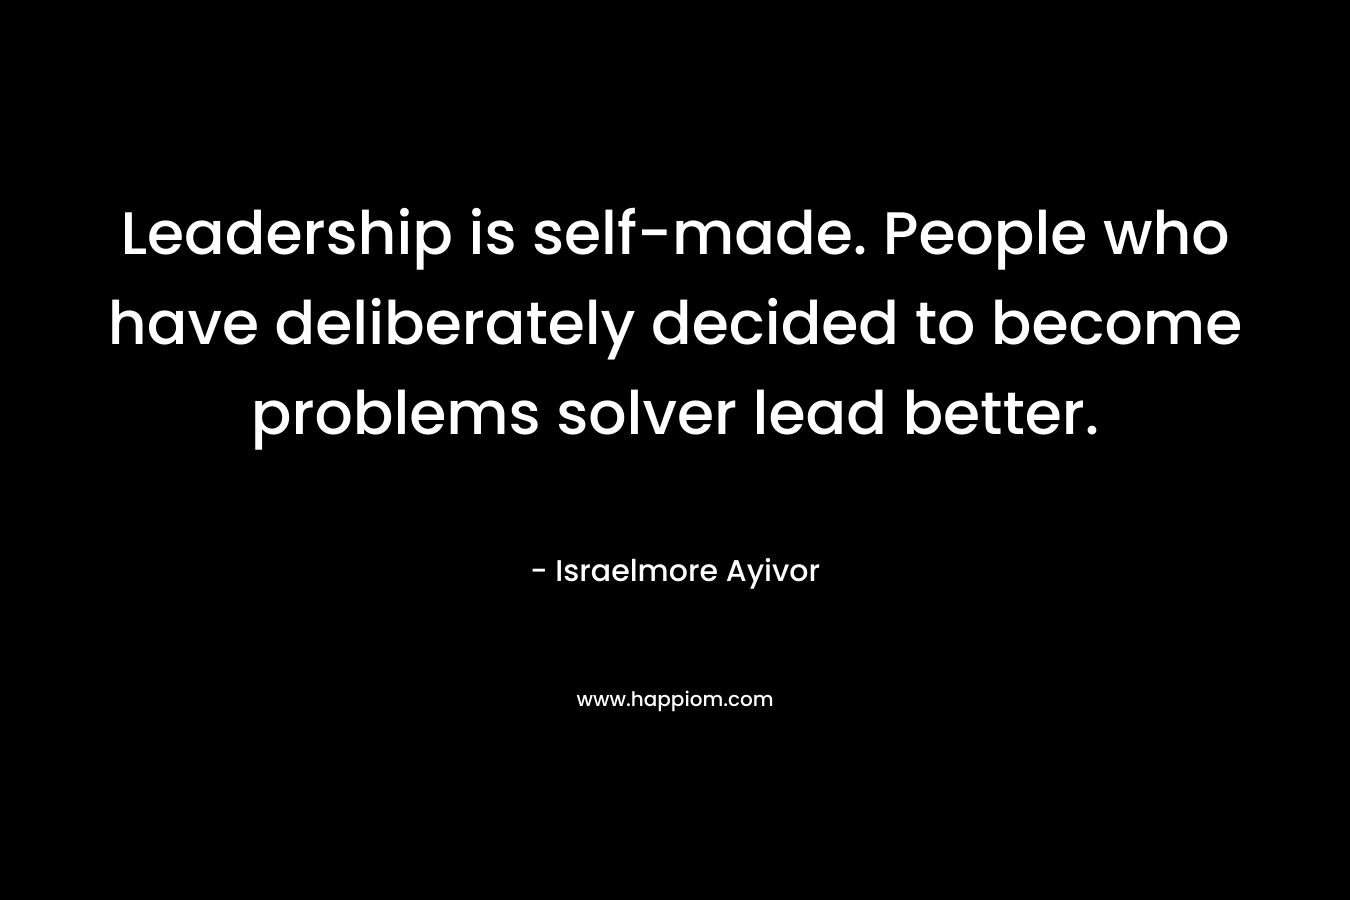 Leadership is self-made. People who have deliberately decided to become problems solver lead better. – Israelmore Ayivor